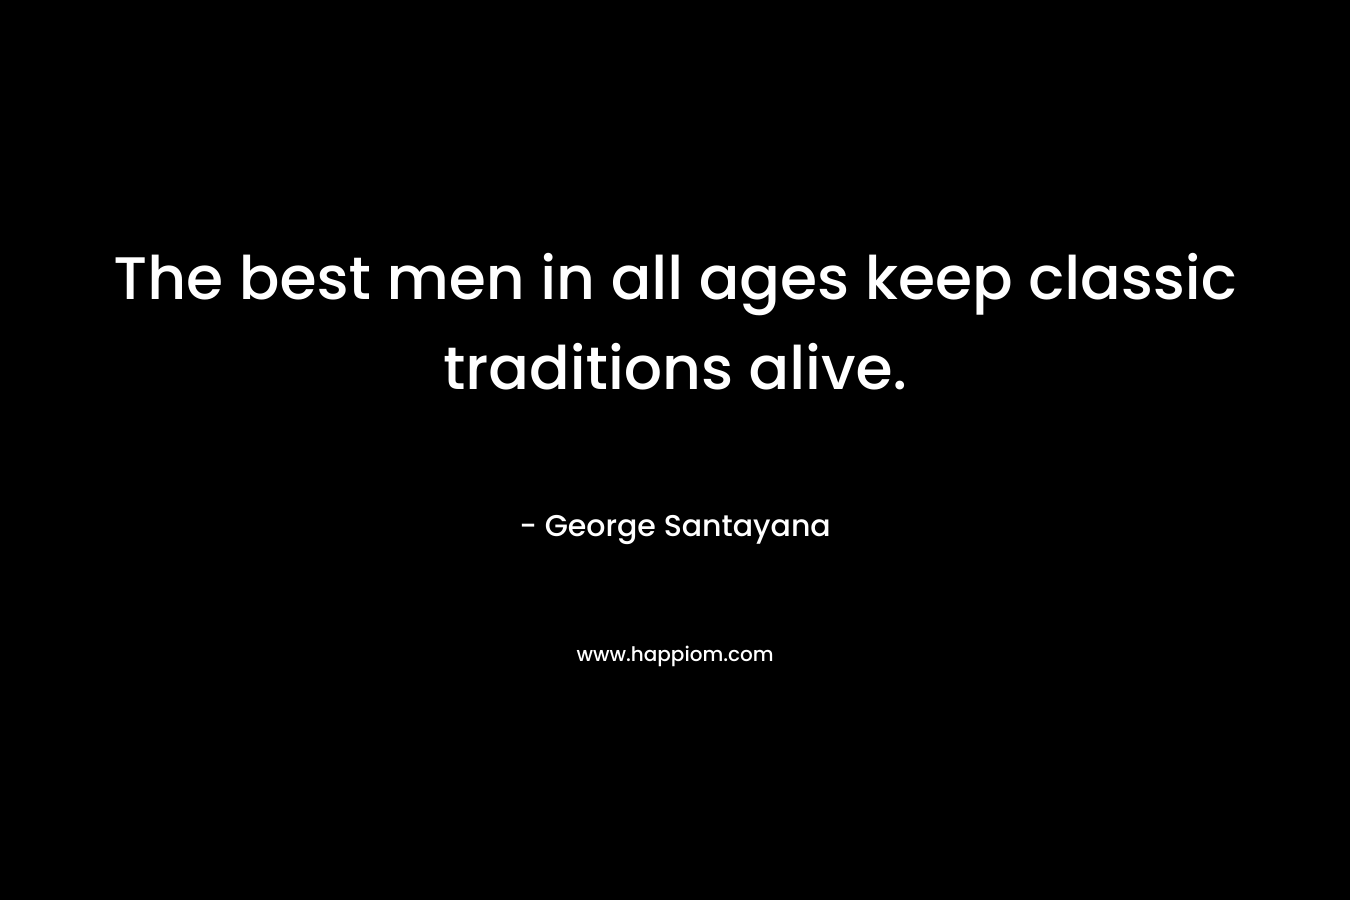 The best men in all ages keep classic traditions alive. – George Santayana